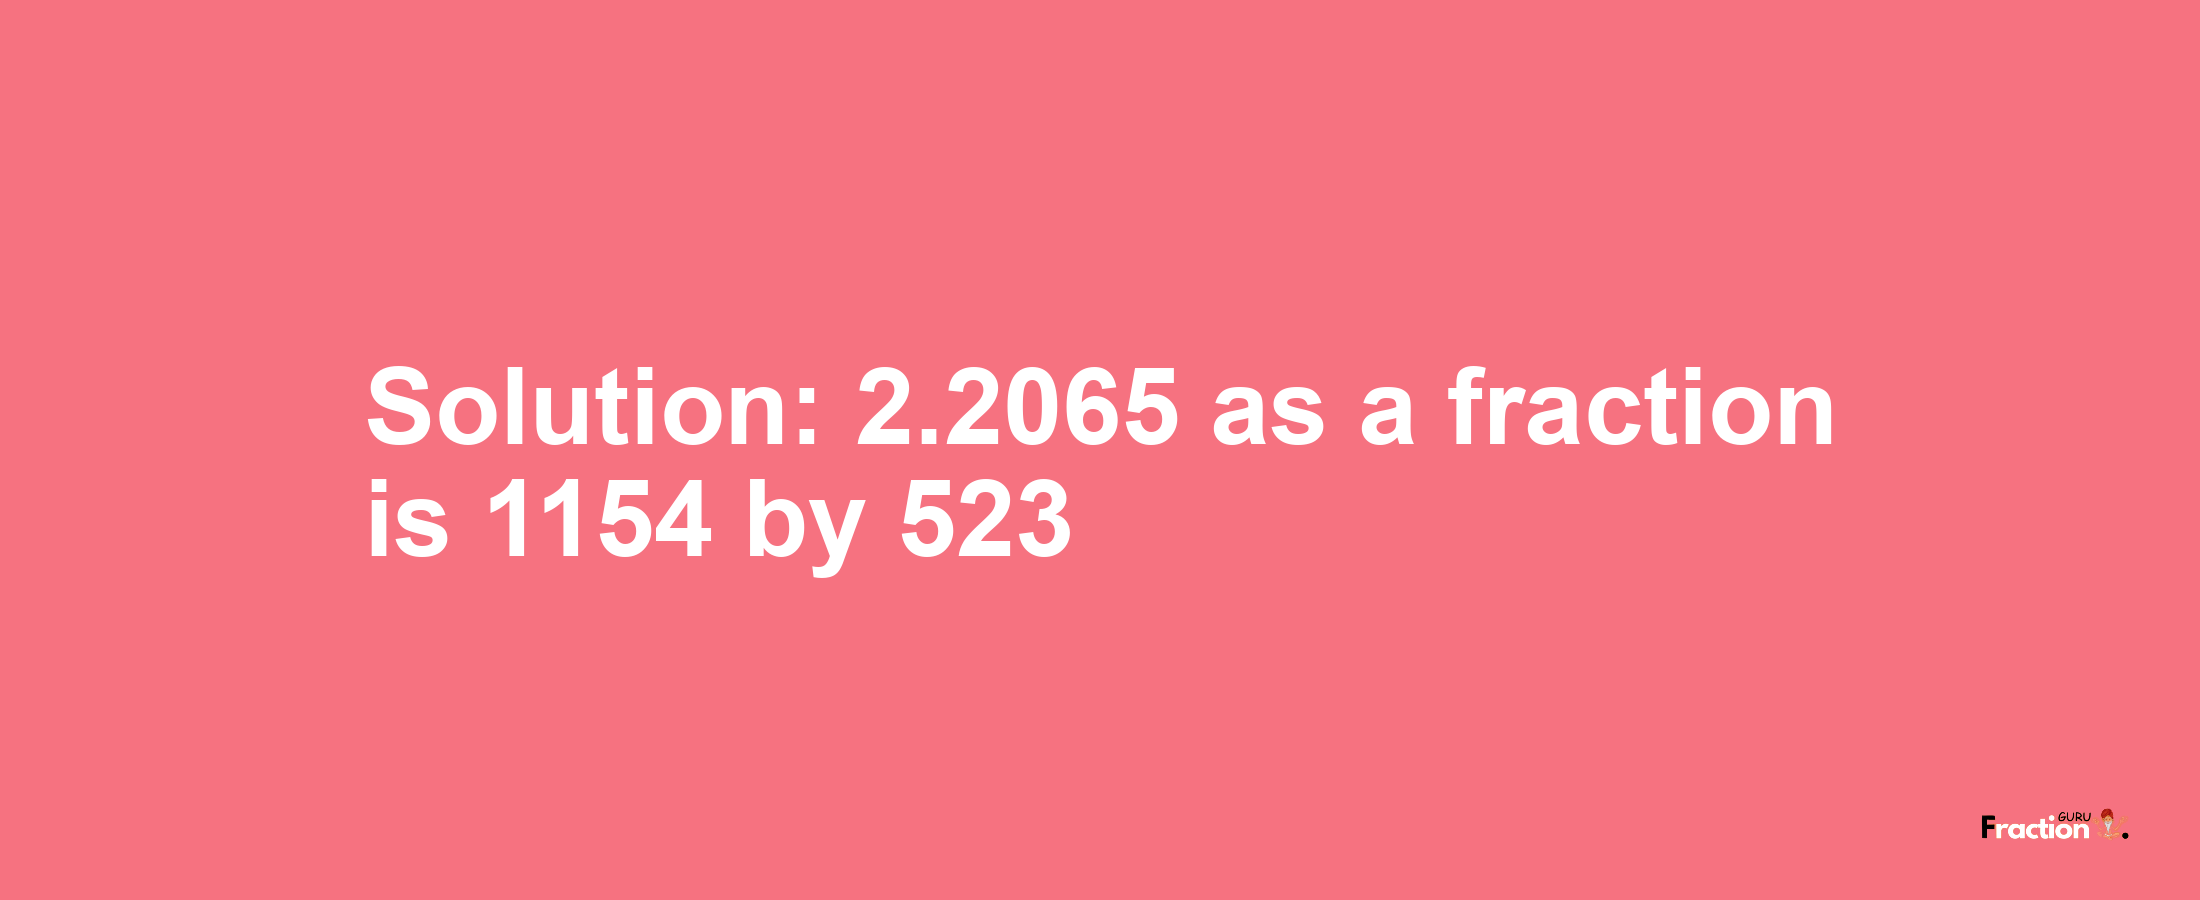 Solution:2.2065 as a fraction is 1154/523